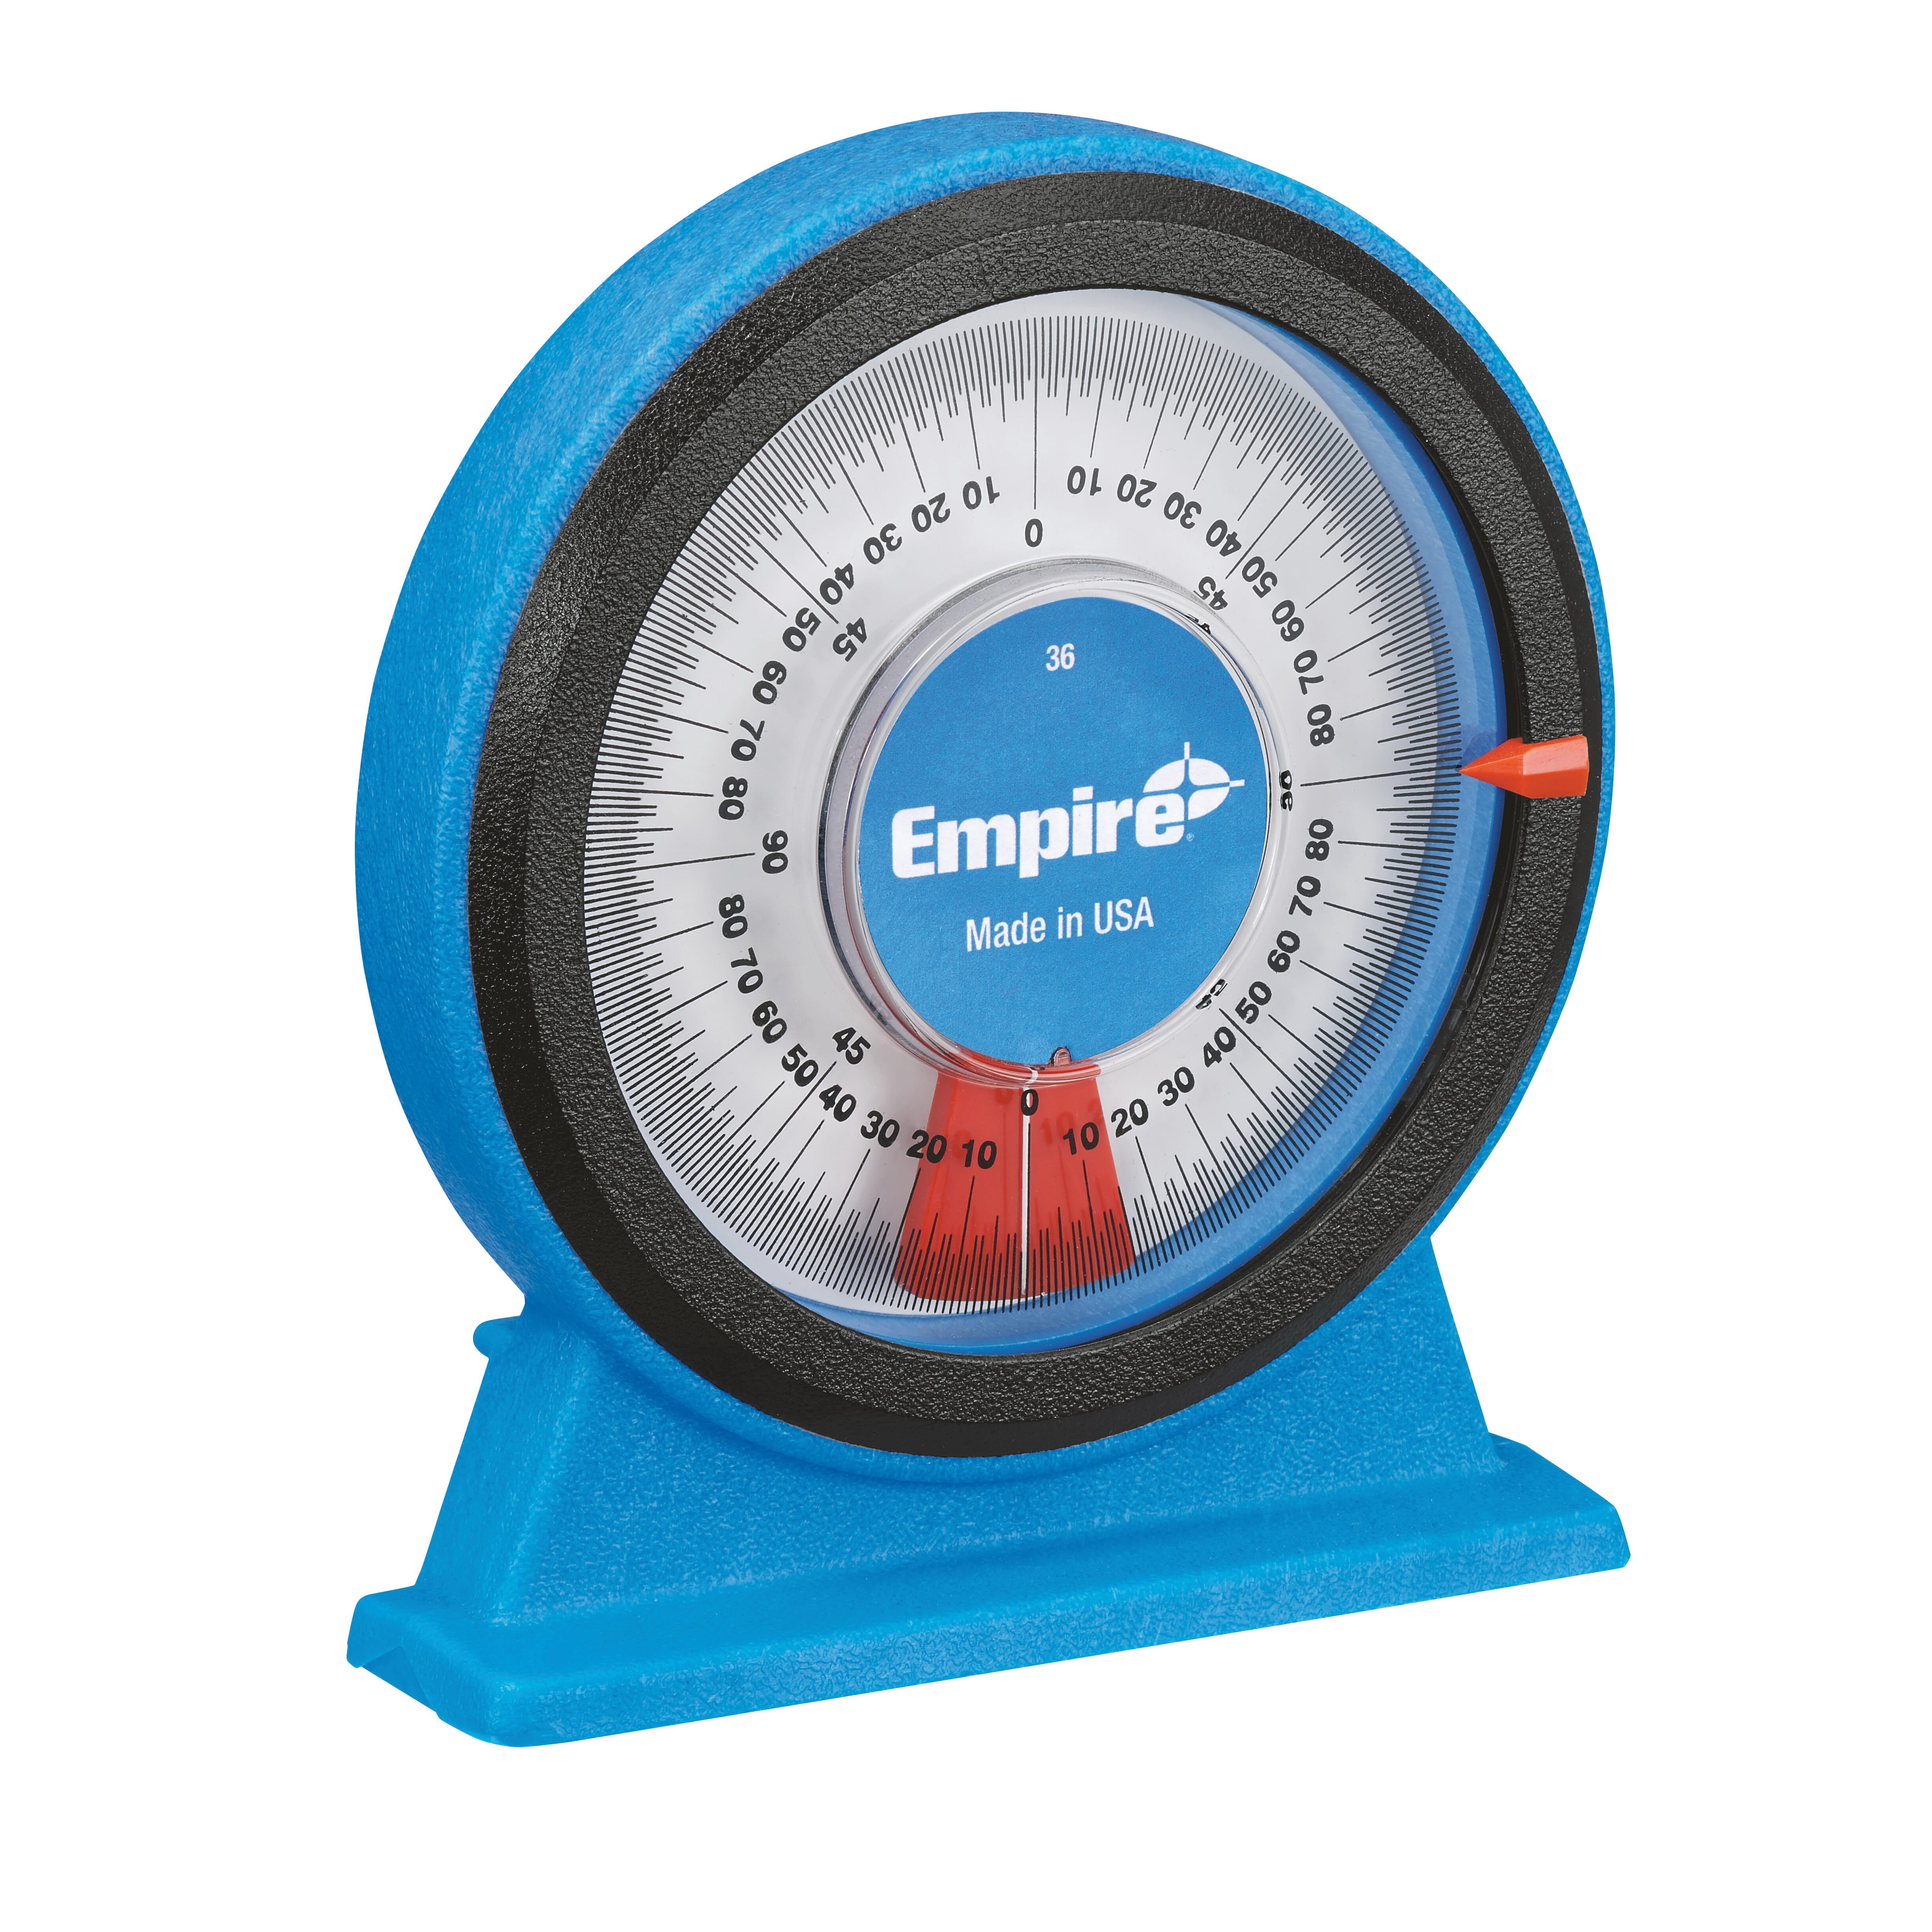 Empire® 36 Magnetic Protractor, 0 to 360 deg Measuring, 5.812 in Blade, Graduations 1/16 in, Plastic